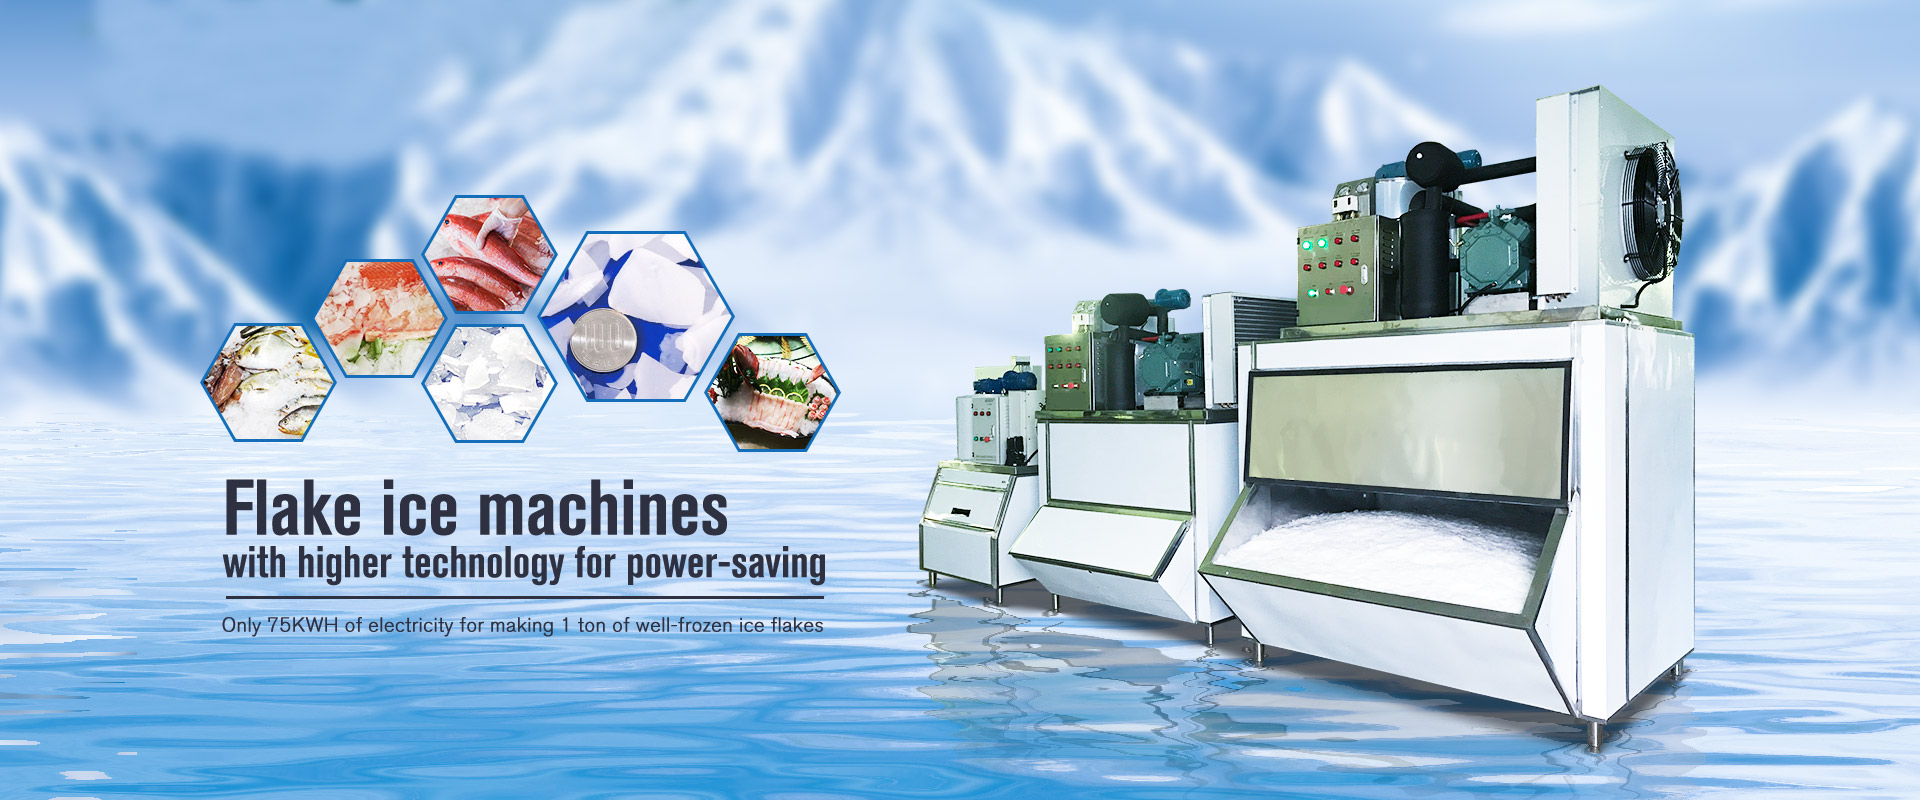 Commercial Flake Ice Machines  North Star Best Commercial & Industrial  Flake Ice Machines, Ice Storage, Ice Delivery Systems